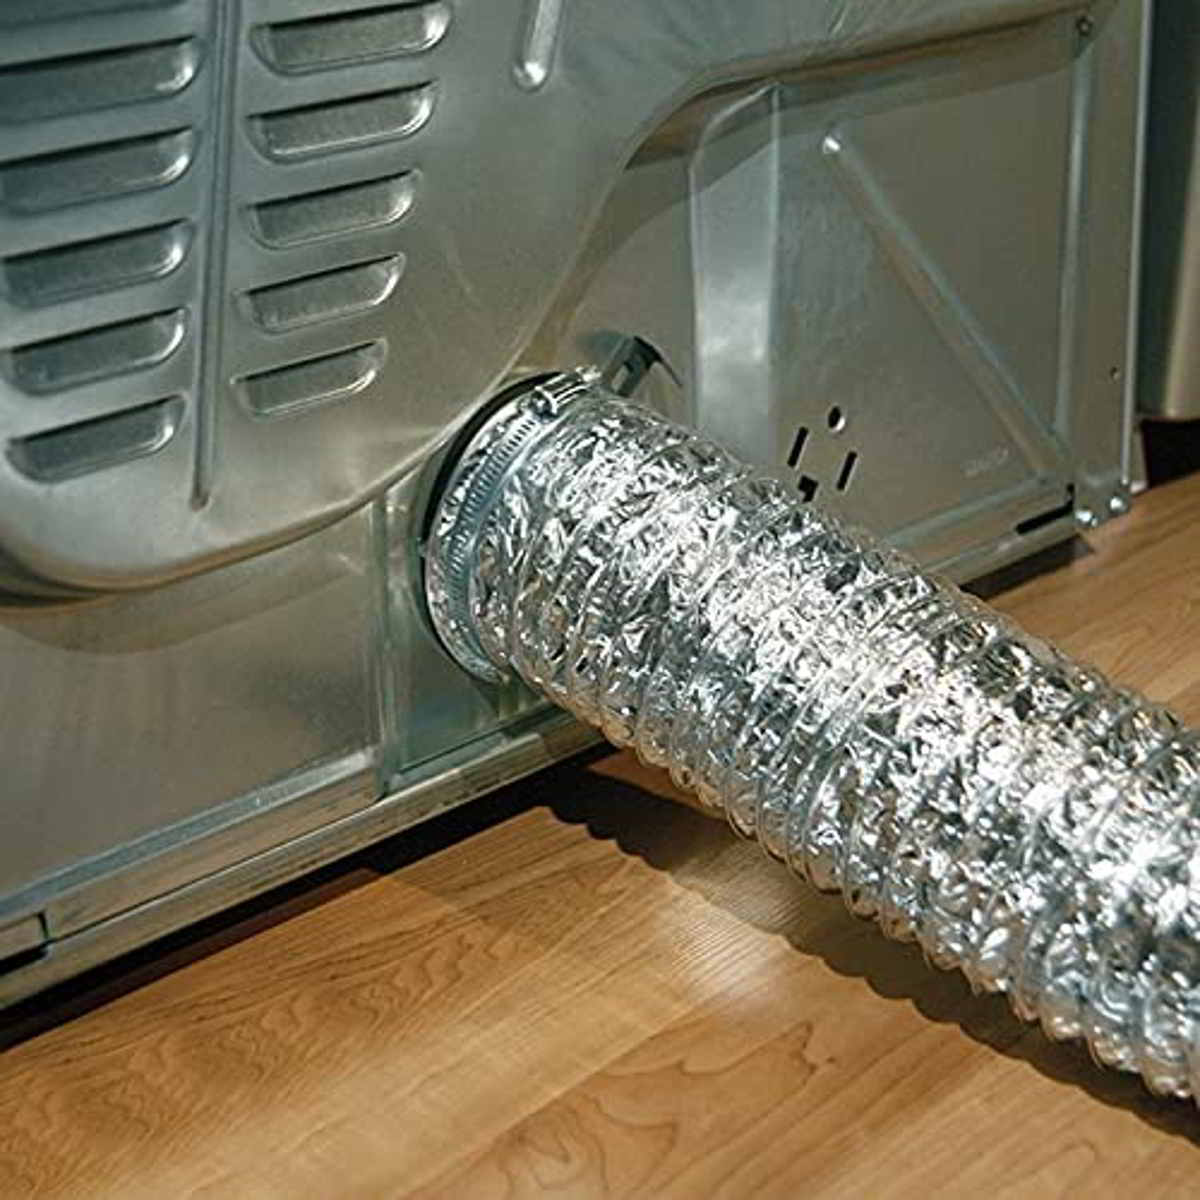 Best Dryer Vent Hose for Tight Space